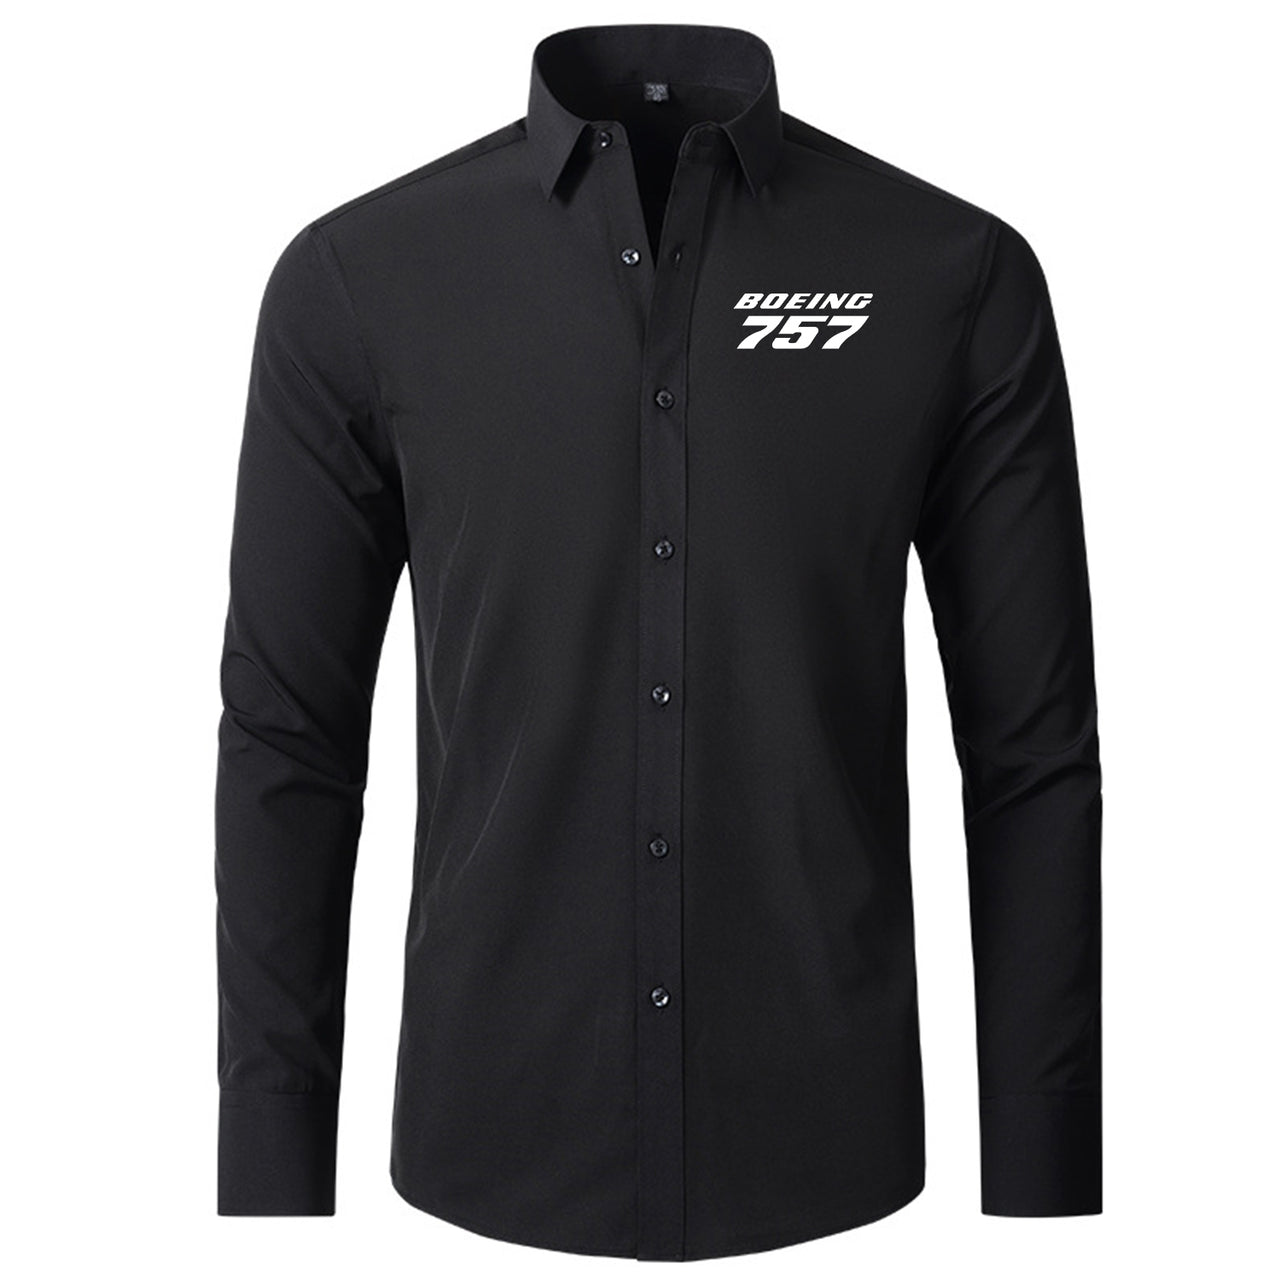 Boeing 757 & Text Designed Long Sleeve Shirts